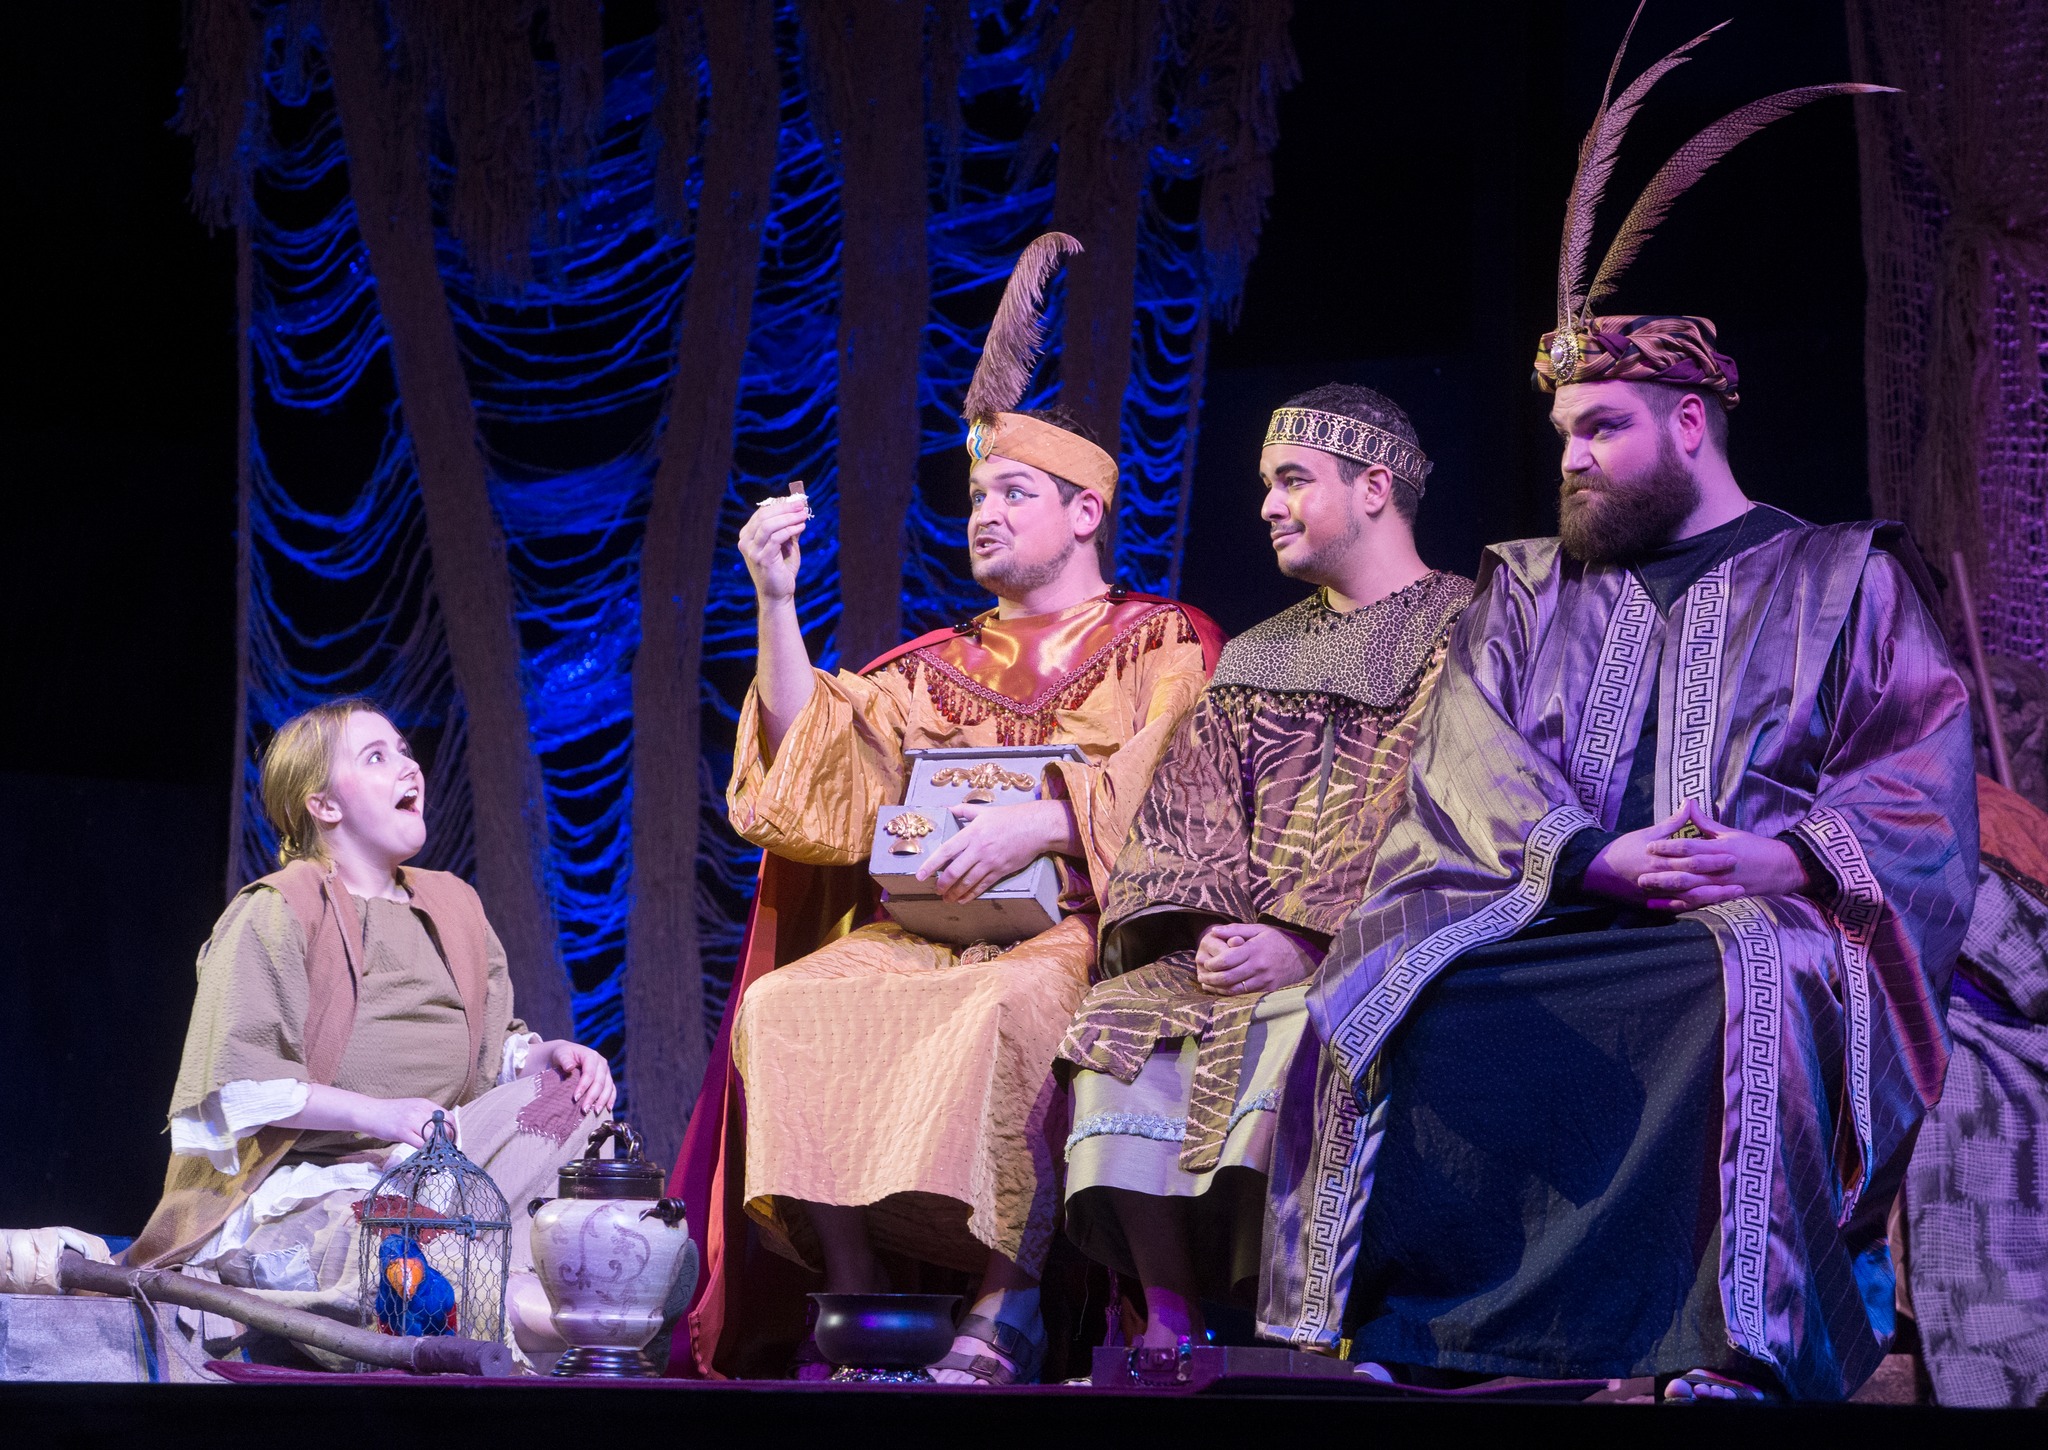 Holiday magic for adults in Amahl and the Night Visitors